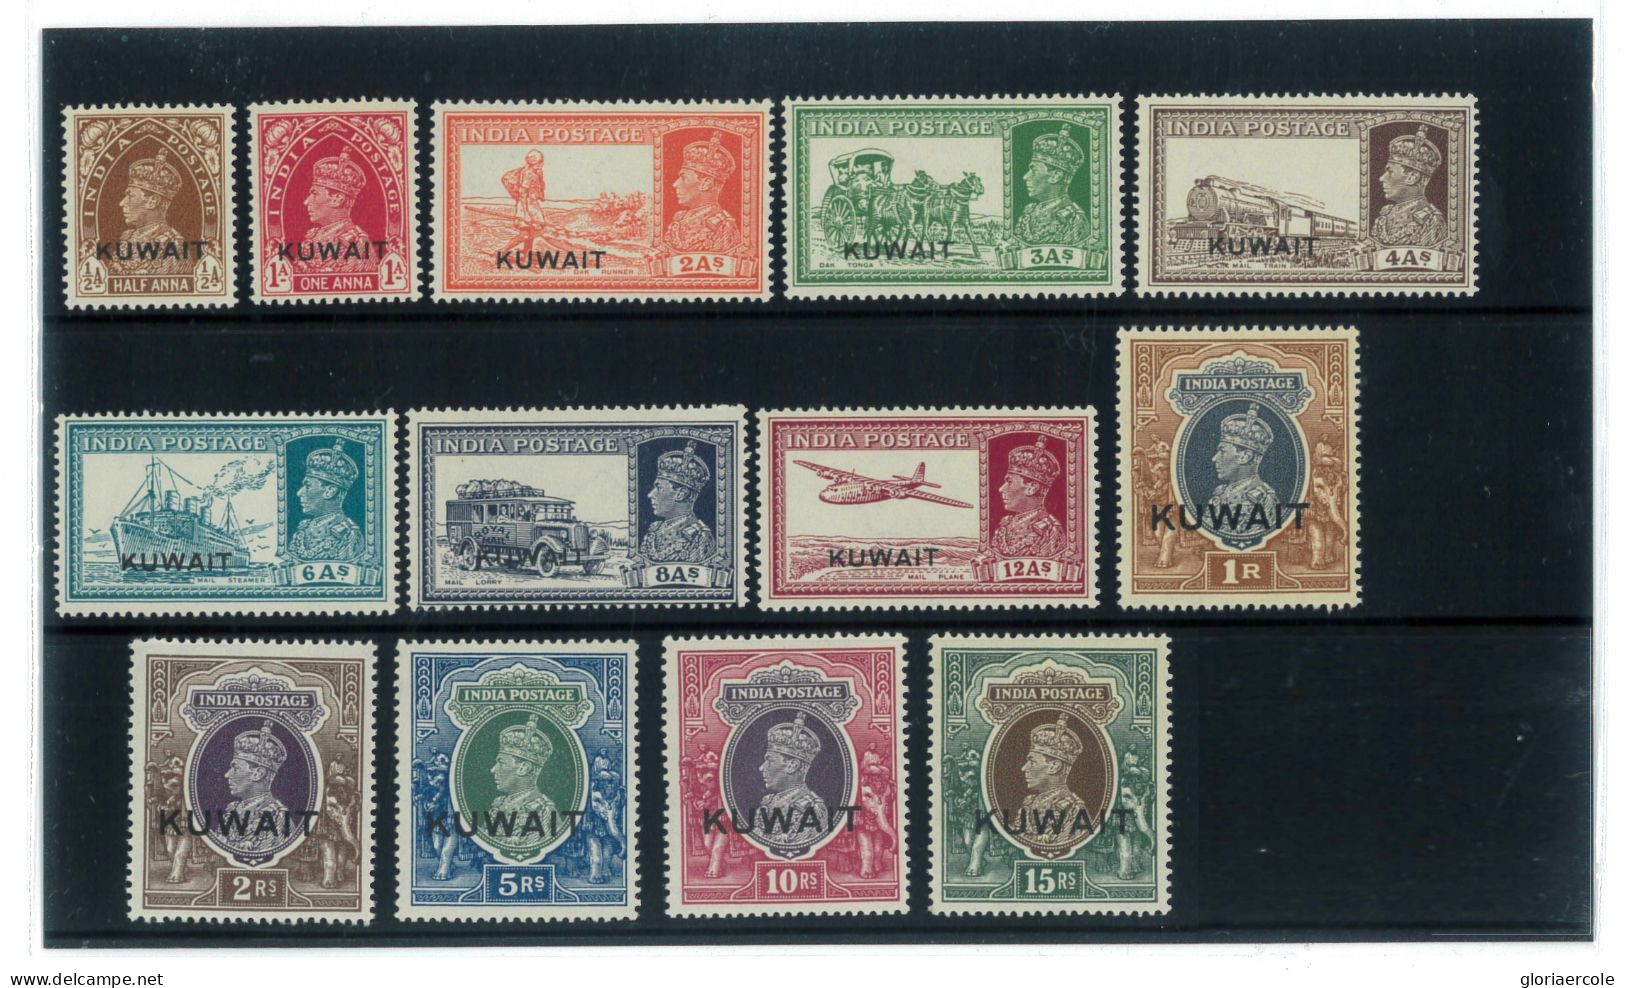 P2973 - KUWAIT, INDIA STAMPS OVERPRINTED 1939 SG 36/51, MNH EXCEPT FOR NUMBER 51. - Kuwait